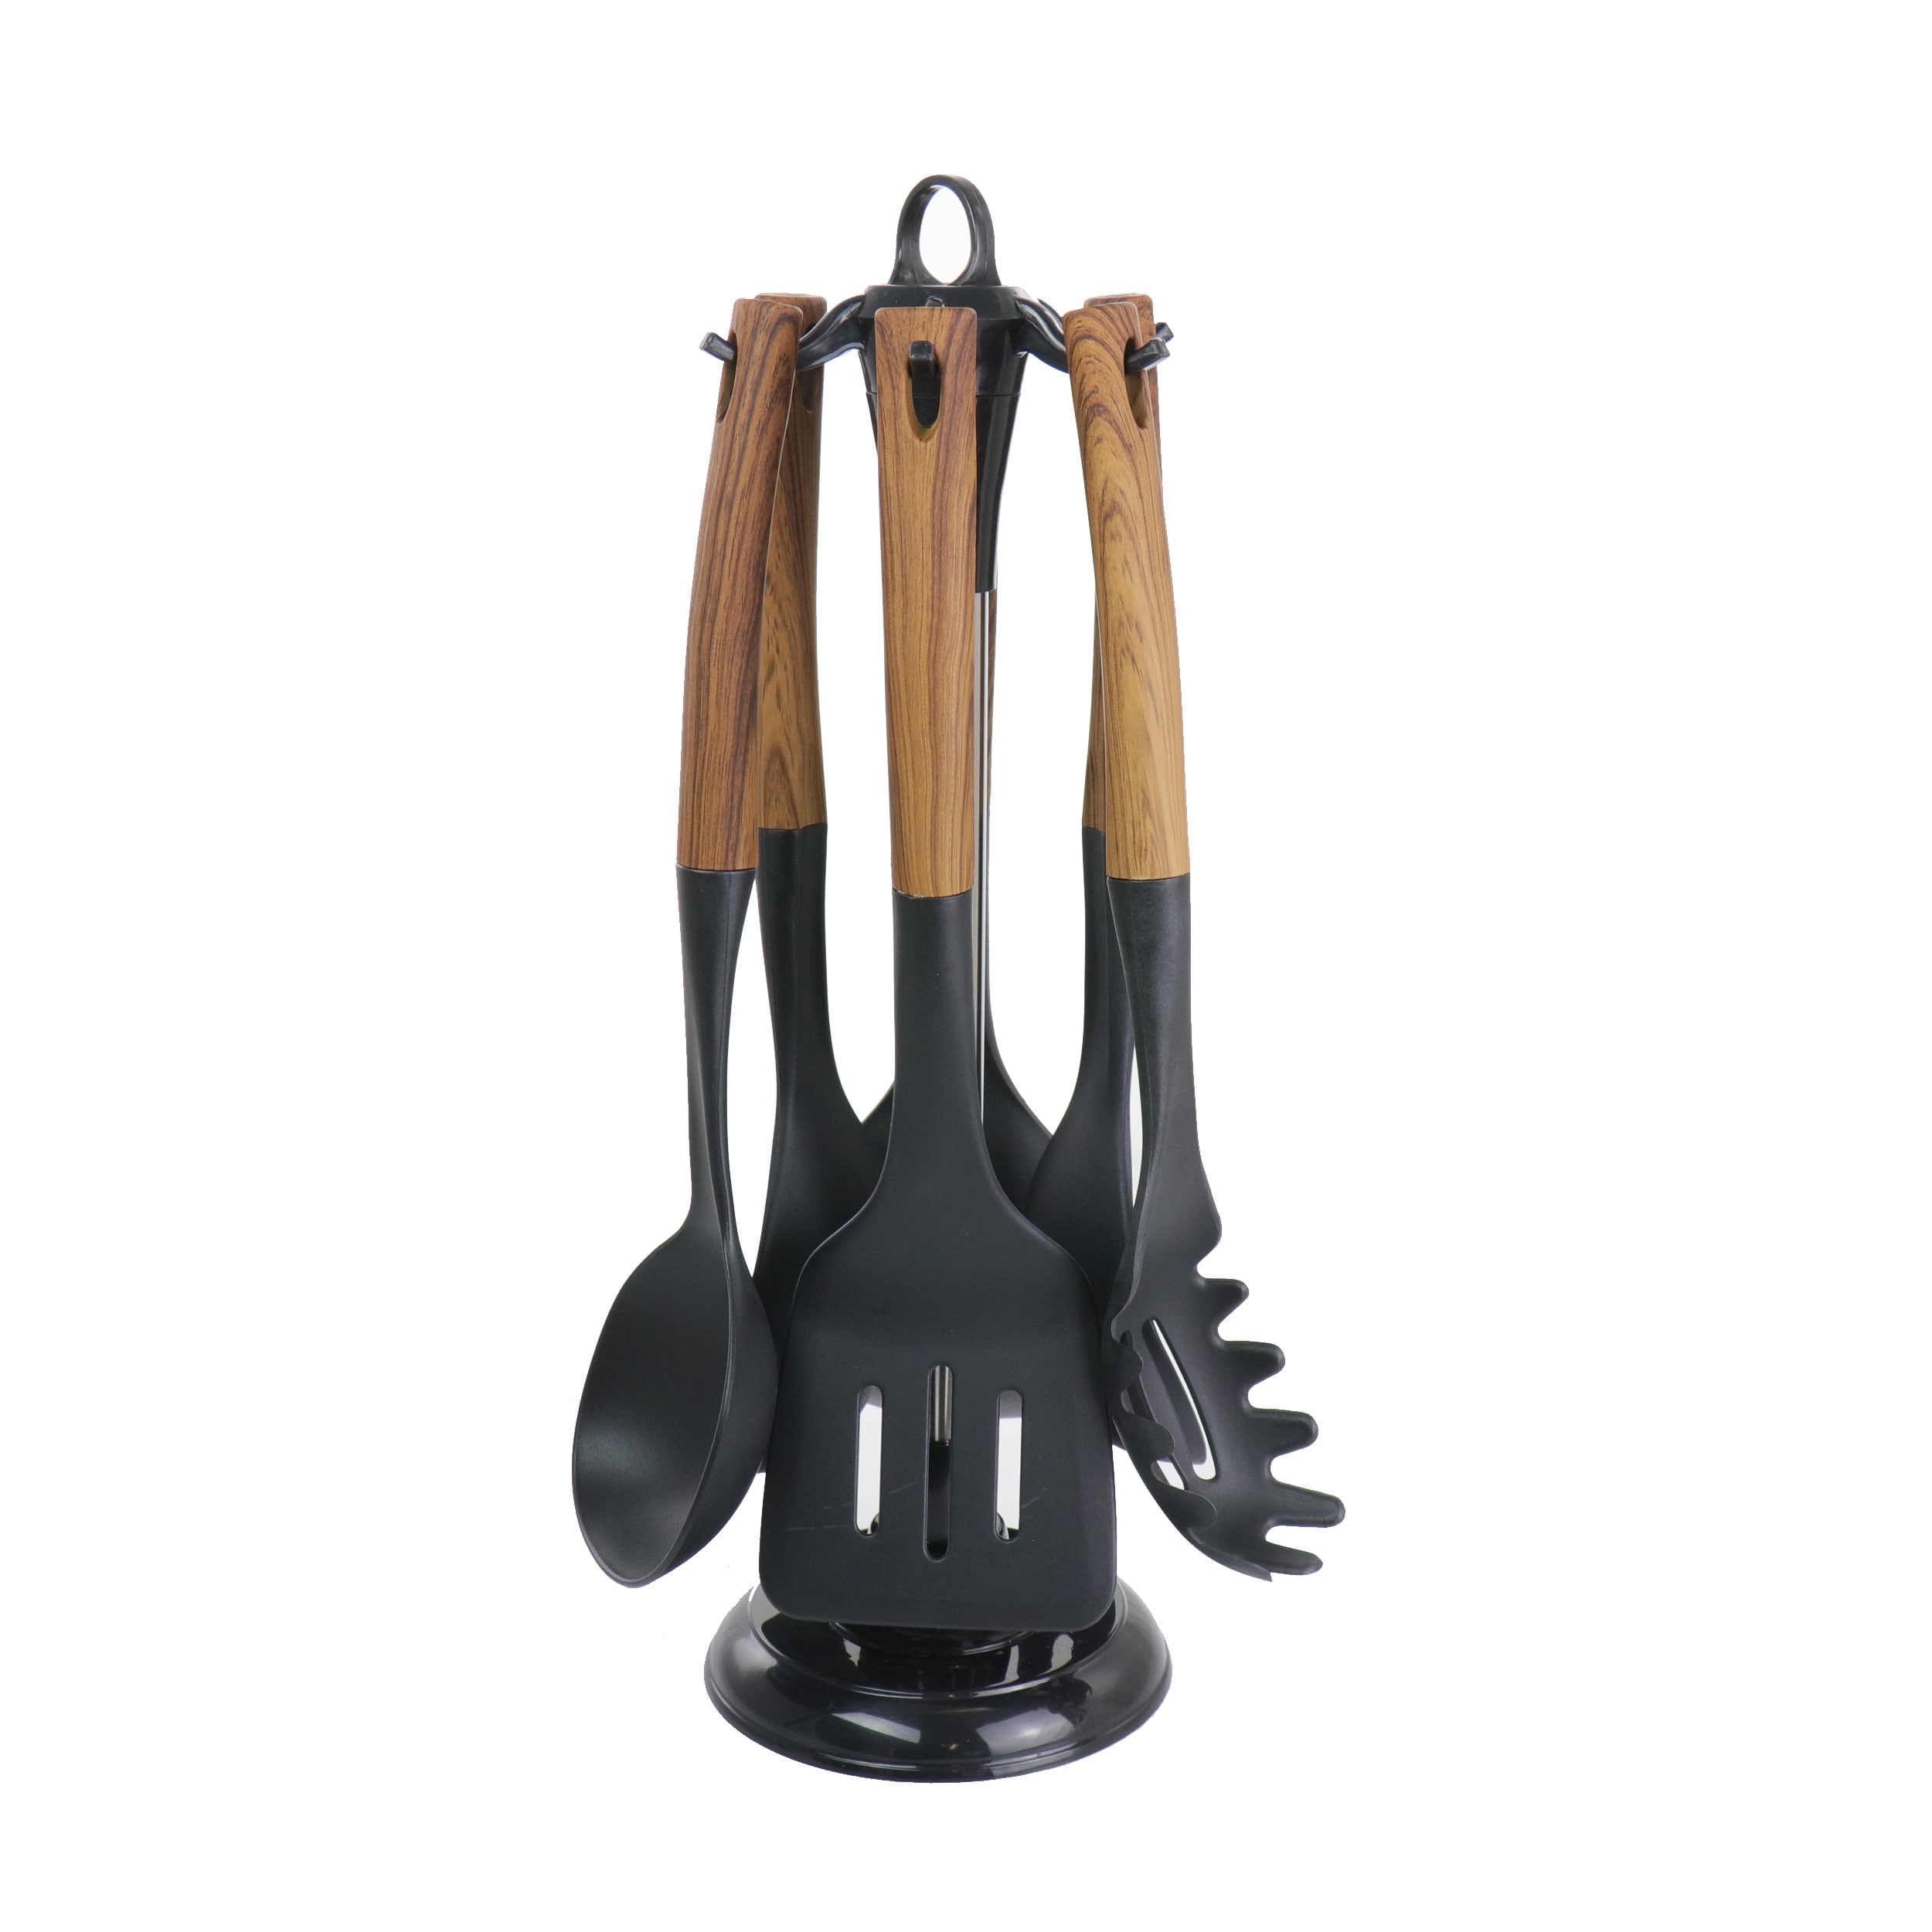 https://ak1.ostkcdn.com/images/products/is/images/direct/b7537f075f1a6f4e9b138bb4685fd90591bd2b86/7-Piece-Nylon-and-Wood-Design-Cooking-Utensils-and-Holder-in-Onyx.jpg